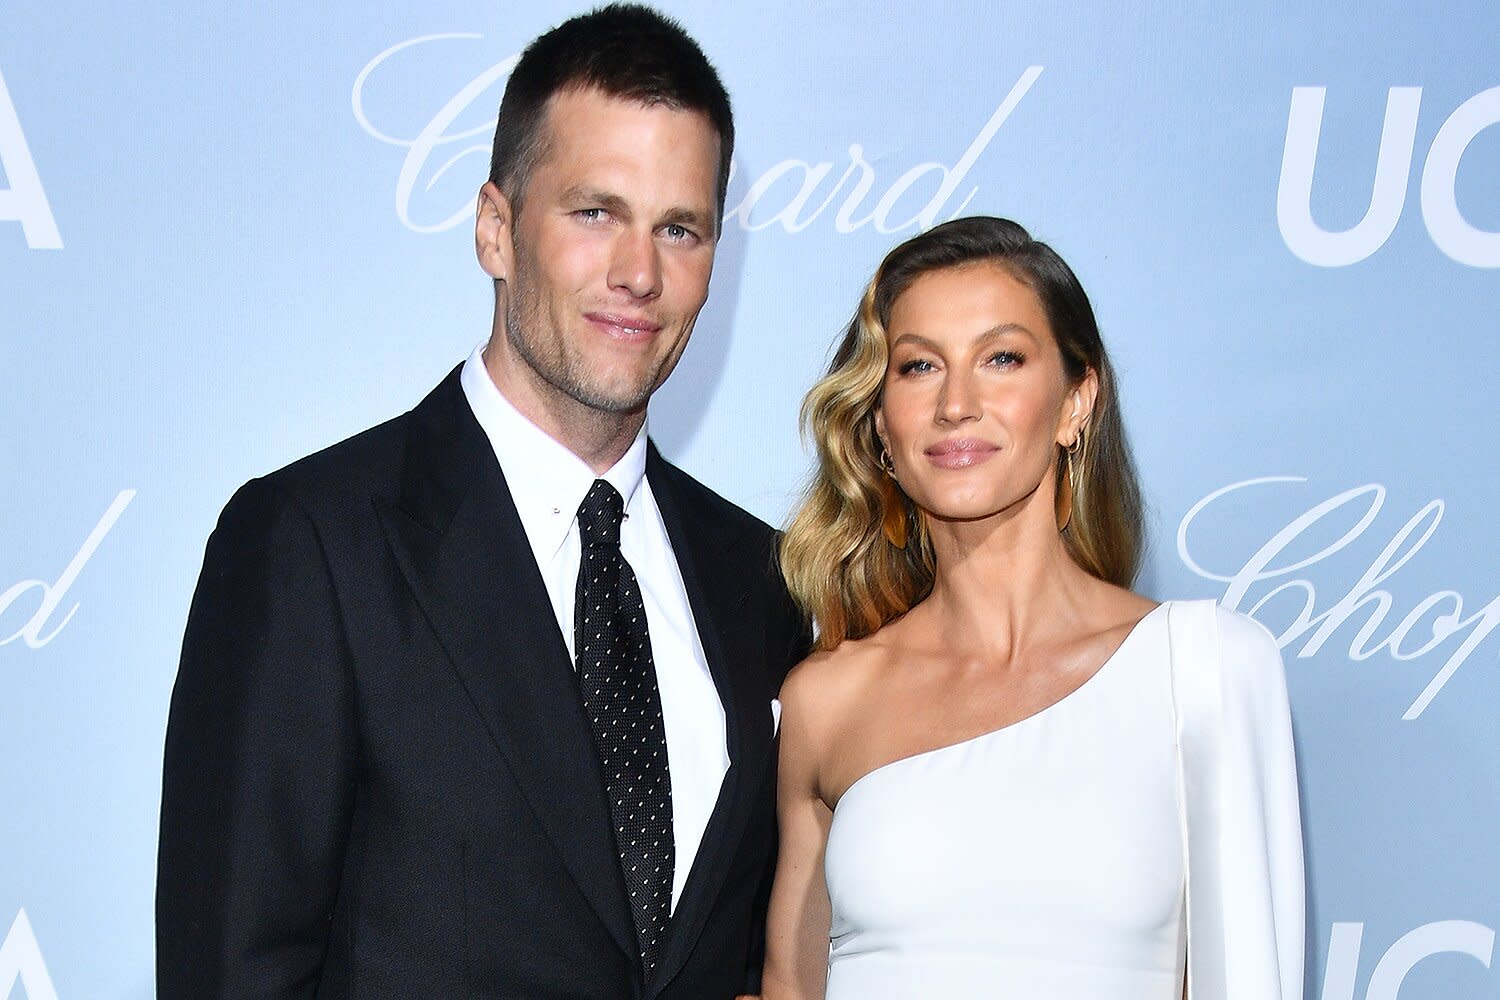 Tom Brady and Gisele Bündchen Sell $40M NYC Apartment and Are House Hunting in L.A.: Source